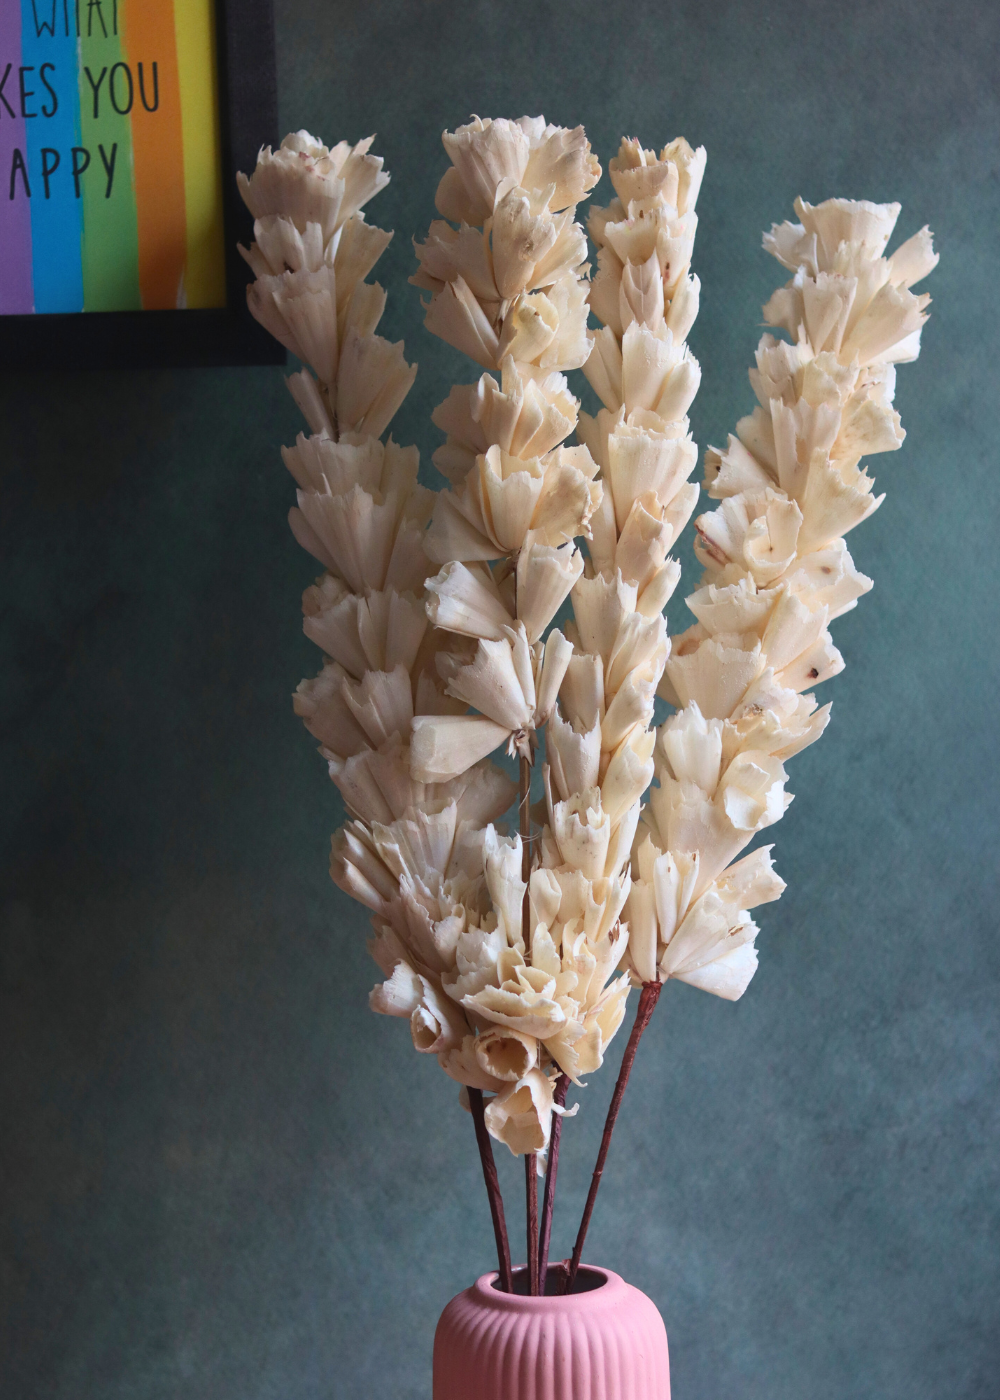 dry flowers, natural flowers & stems, bunch